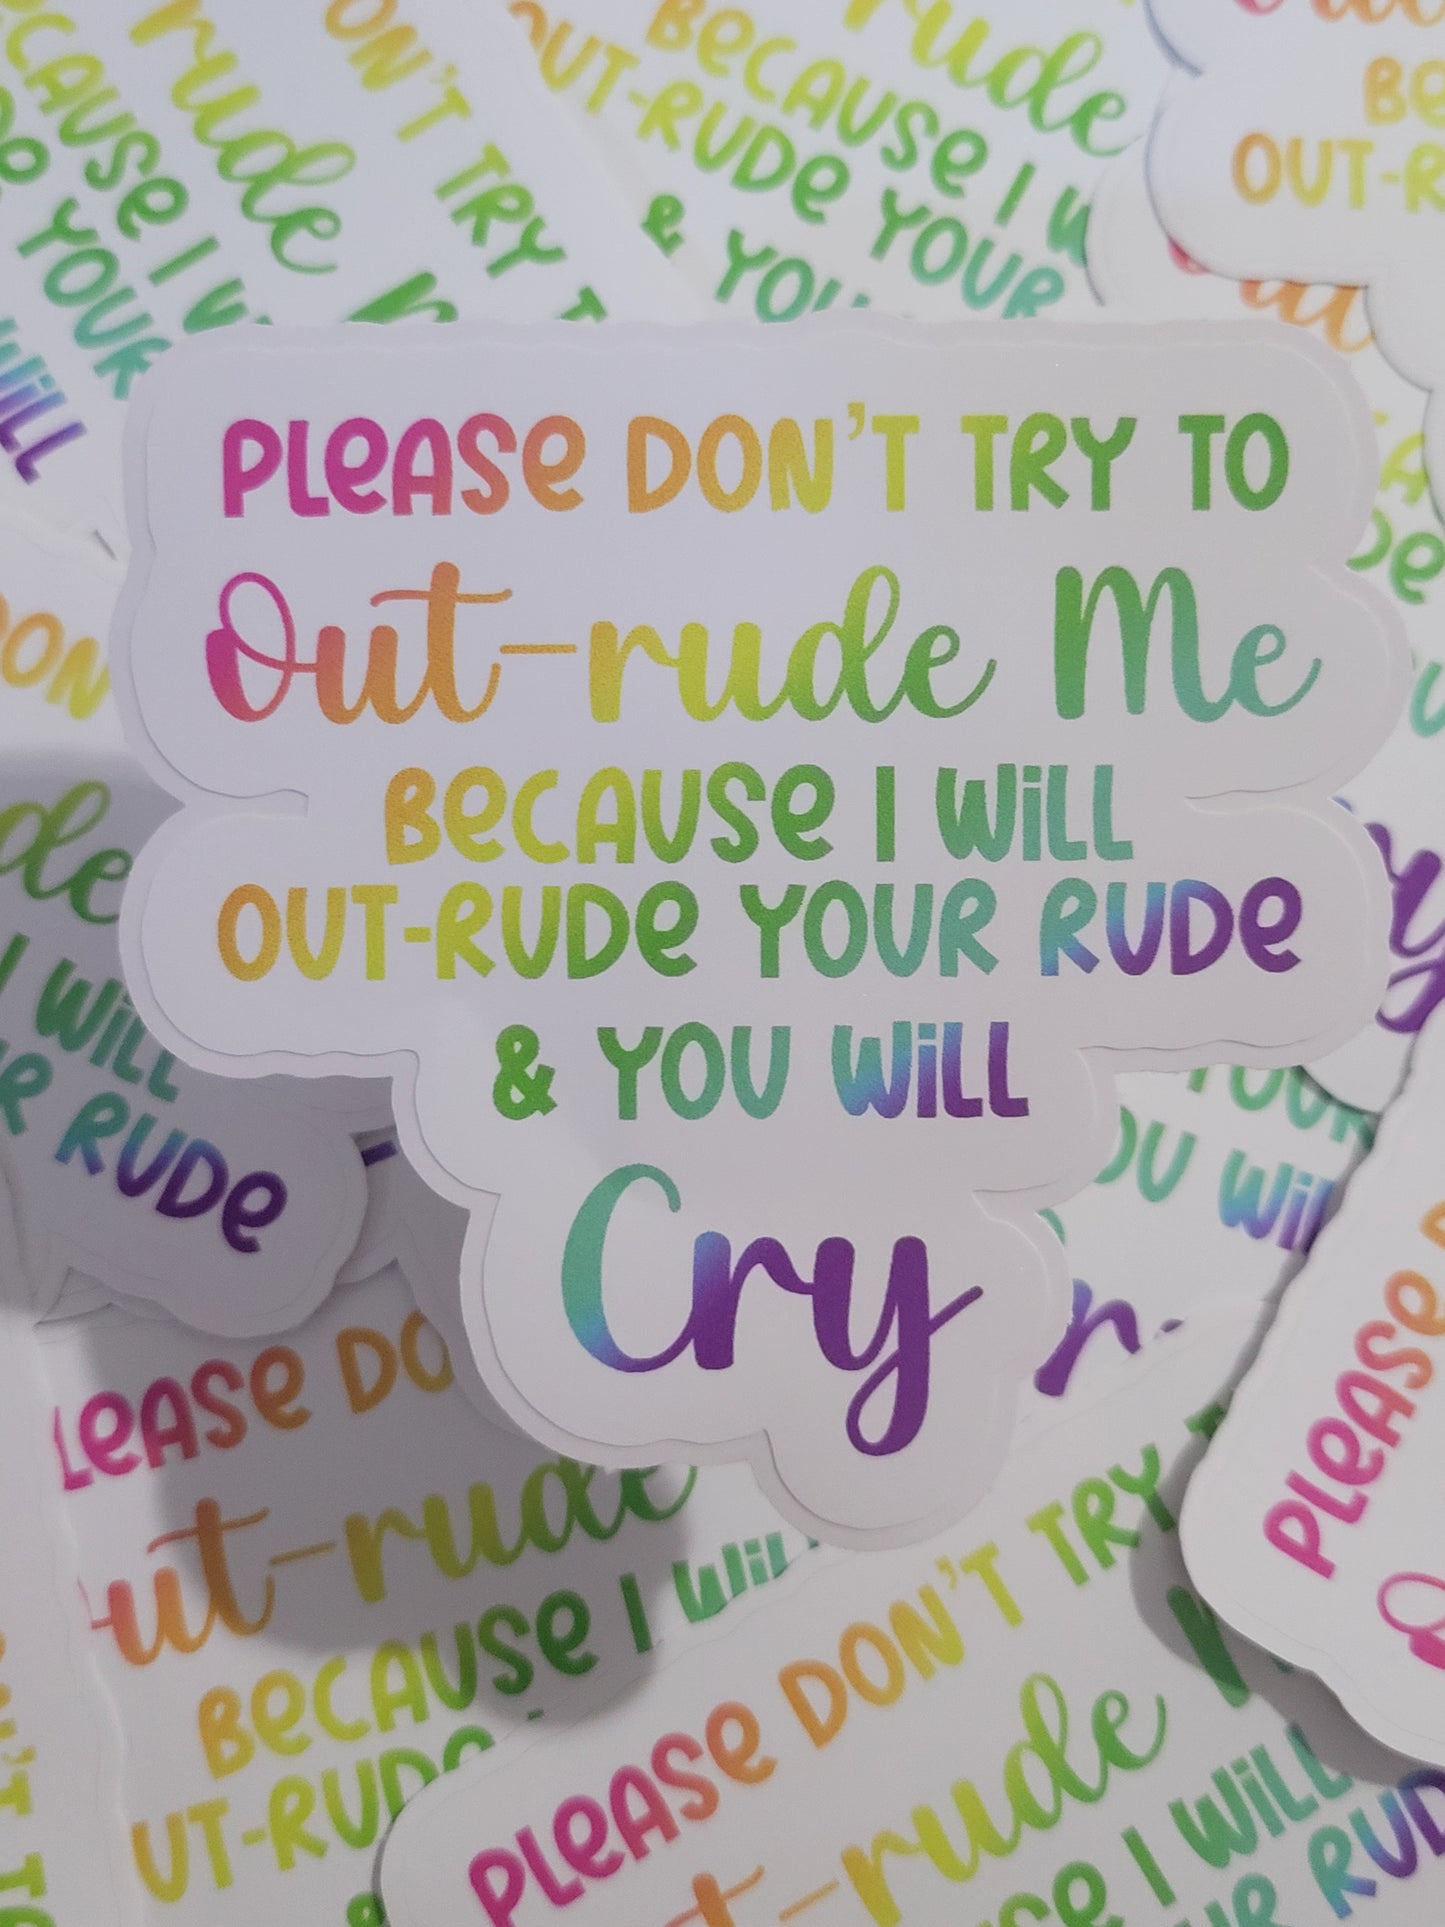 Please don't out-rude me because I will out-rude your rude & you will cry Die cut sticker 3-5 Business Day TAT